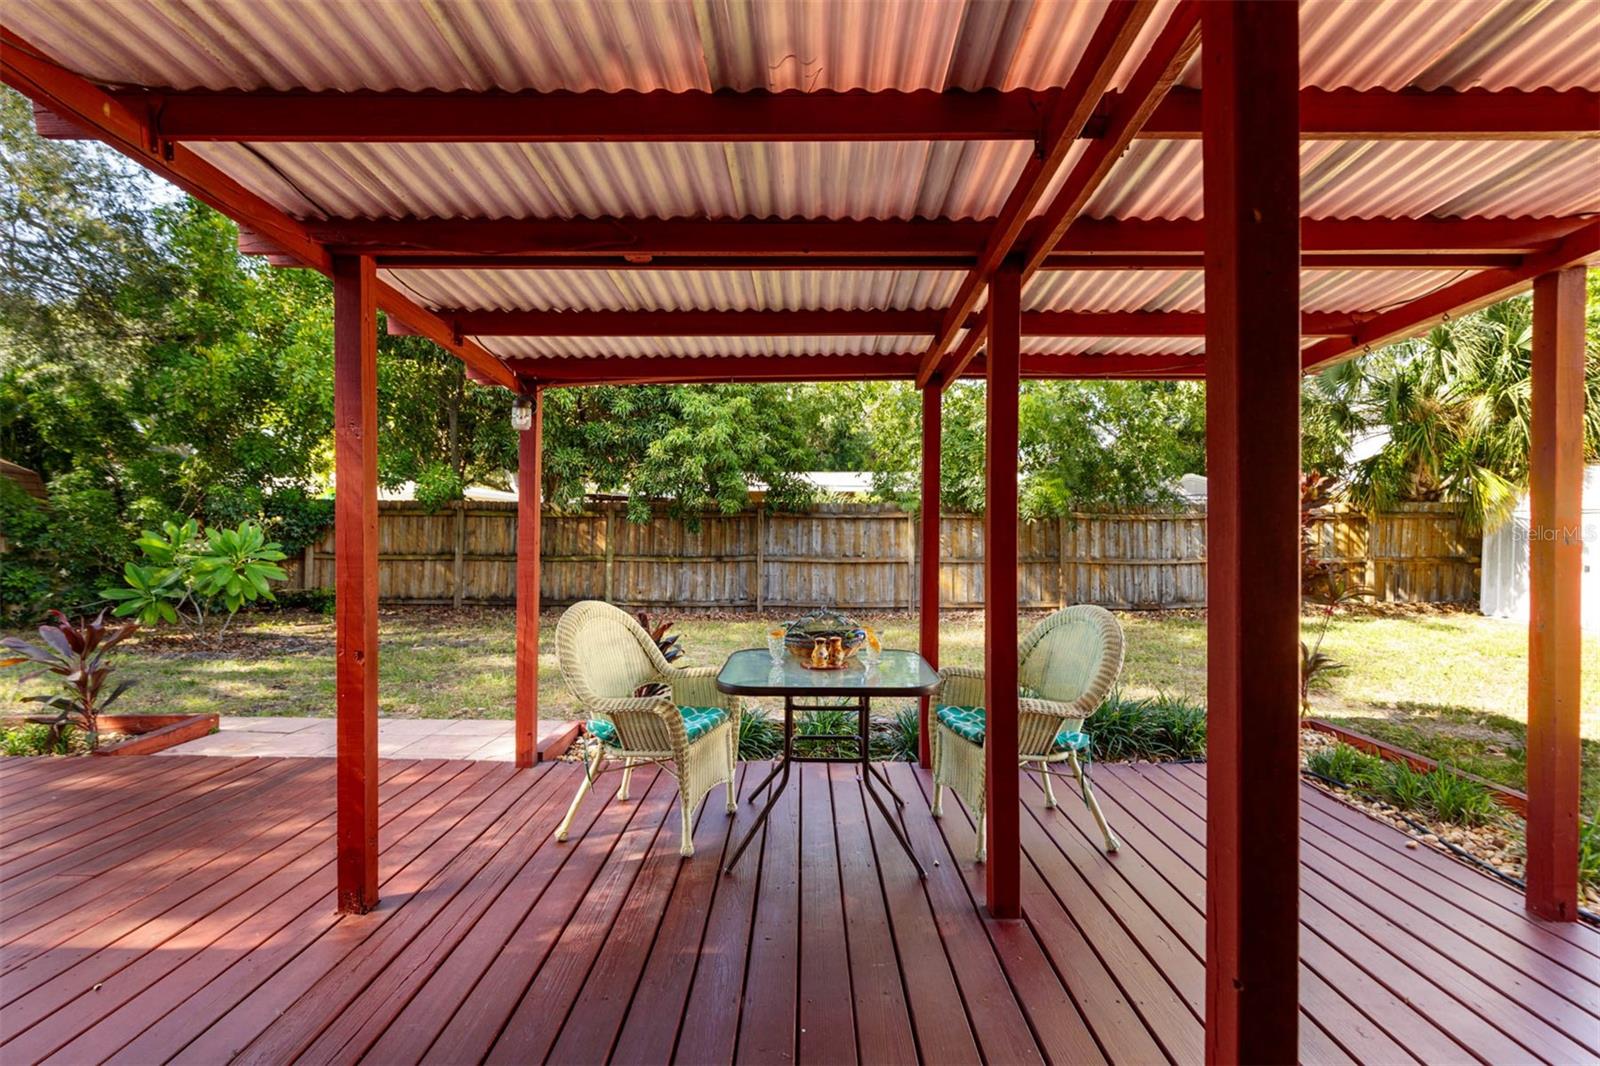 Shady backyard and covered porch breezy delightful space to enjoy